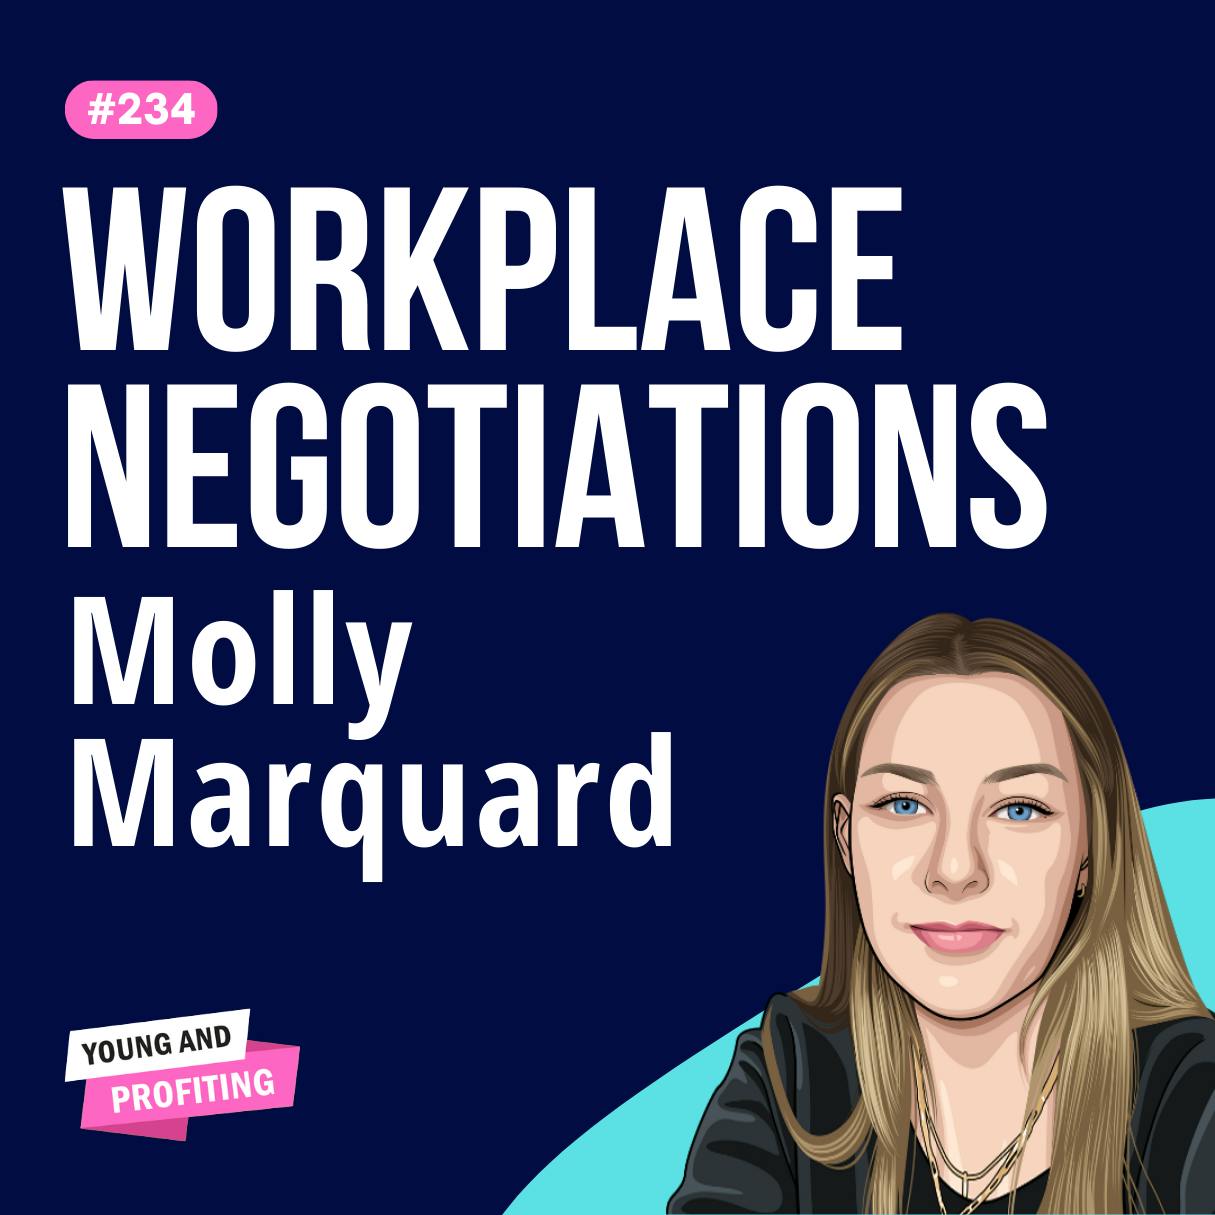 Molly Marquard: The Art of Negotiation, Boost Your Career With These Expert Negotiation Strategies | E234 by Hala Taha | YAP Media Network